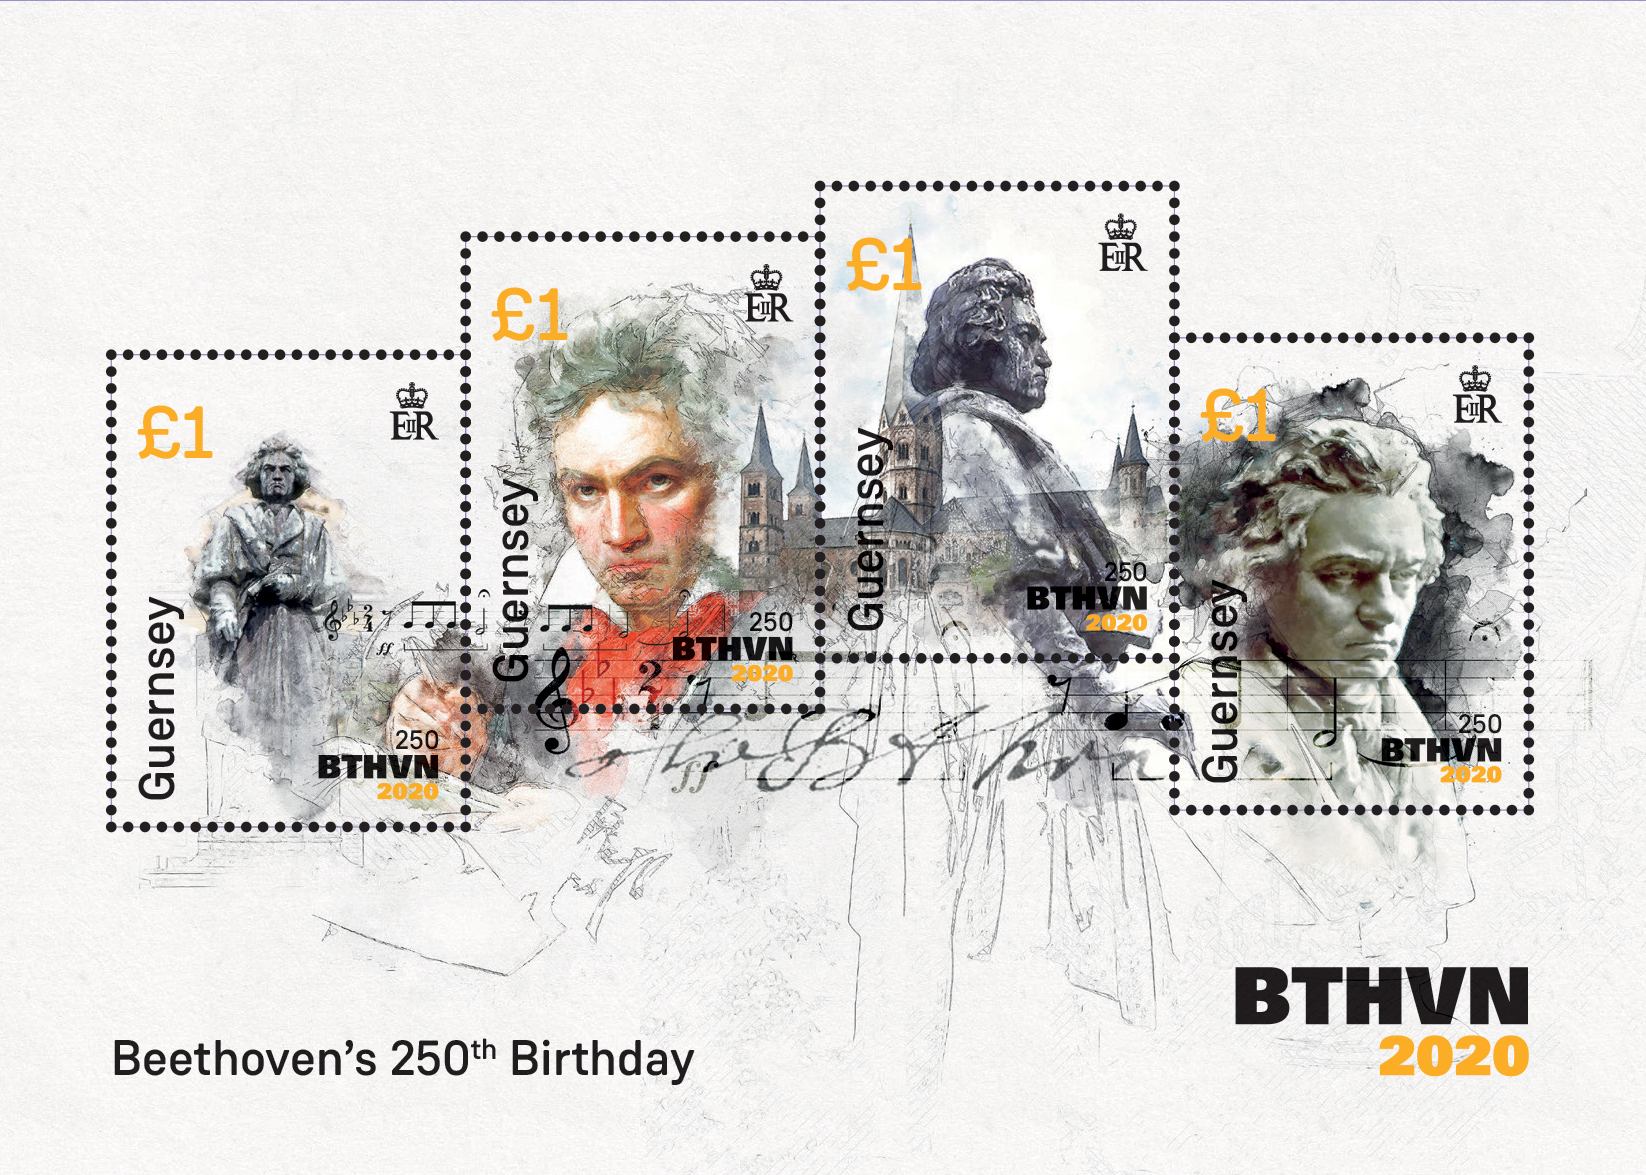 Final commemorative stamp for Beethoven's 250th Anniversary